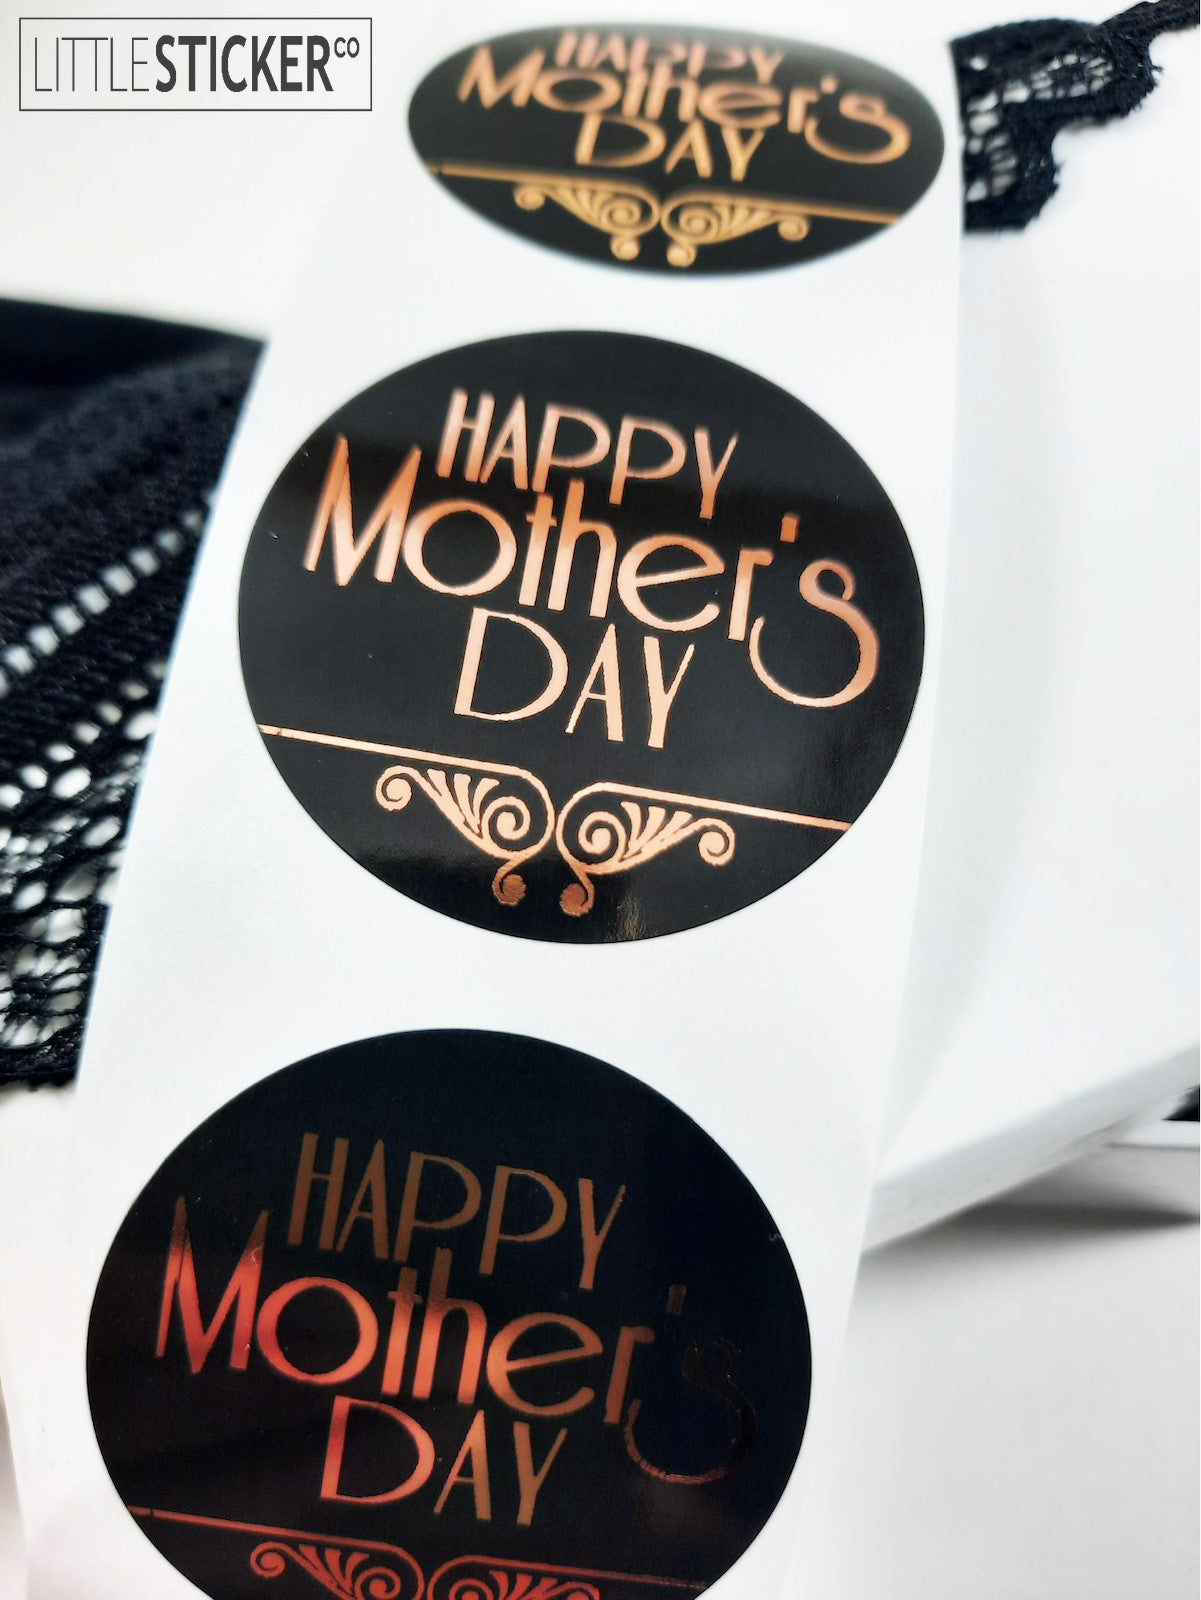 Happy Mother's Day stickers. 40mm round gloss black with Foil rose gold Art deco design and text